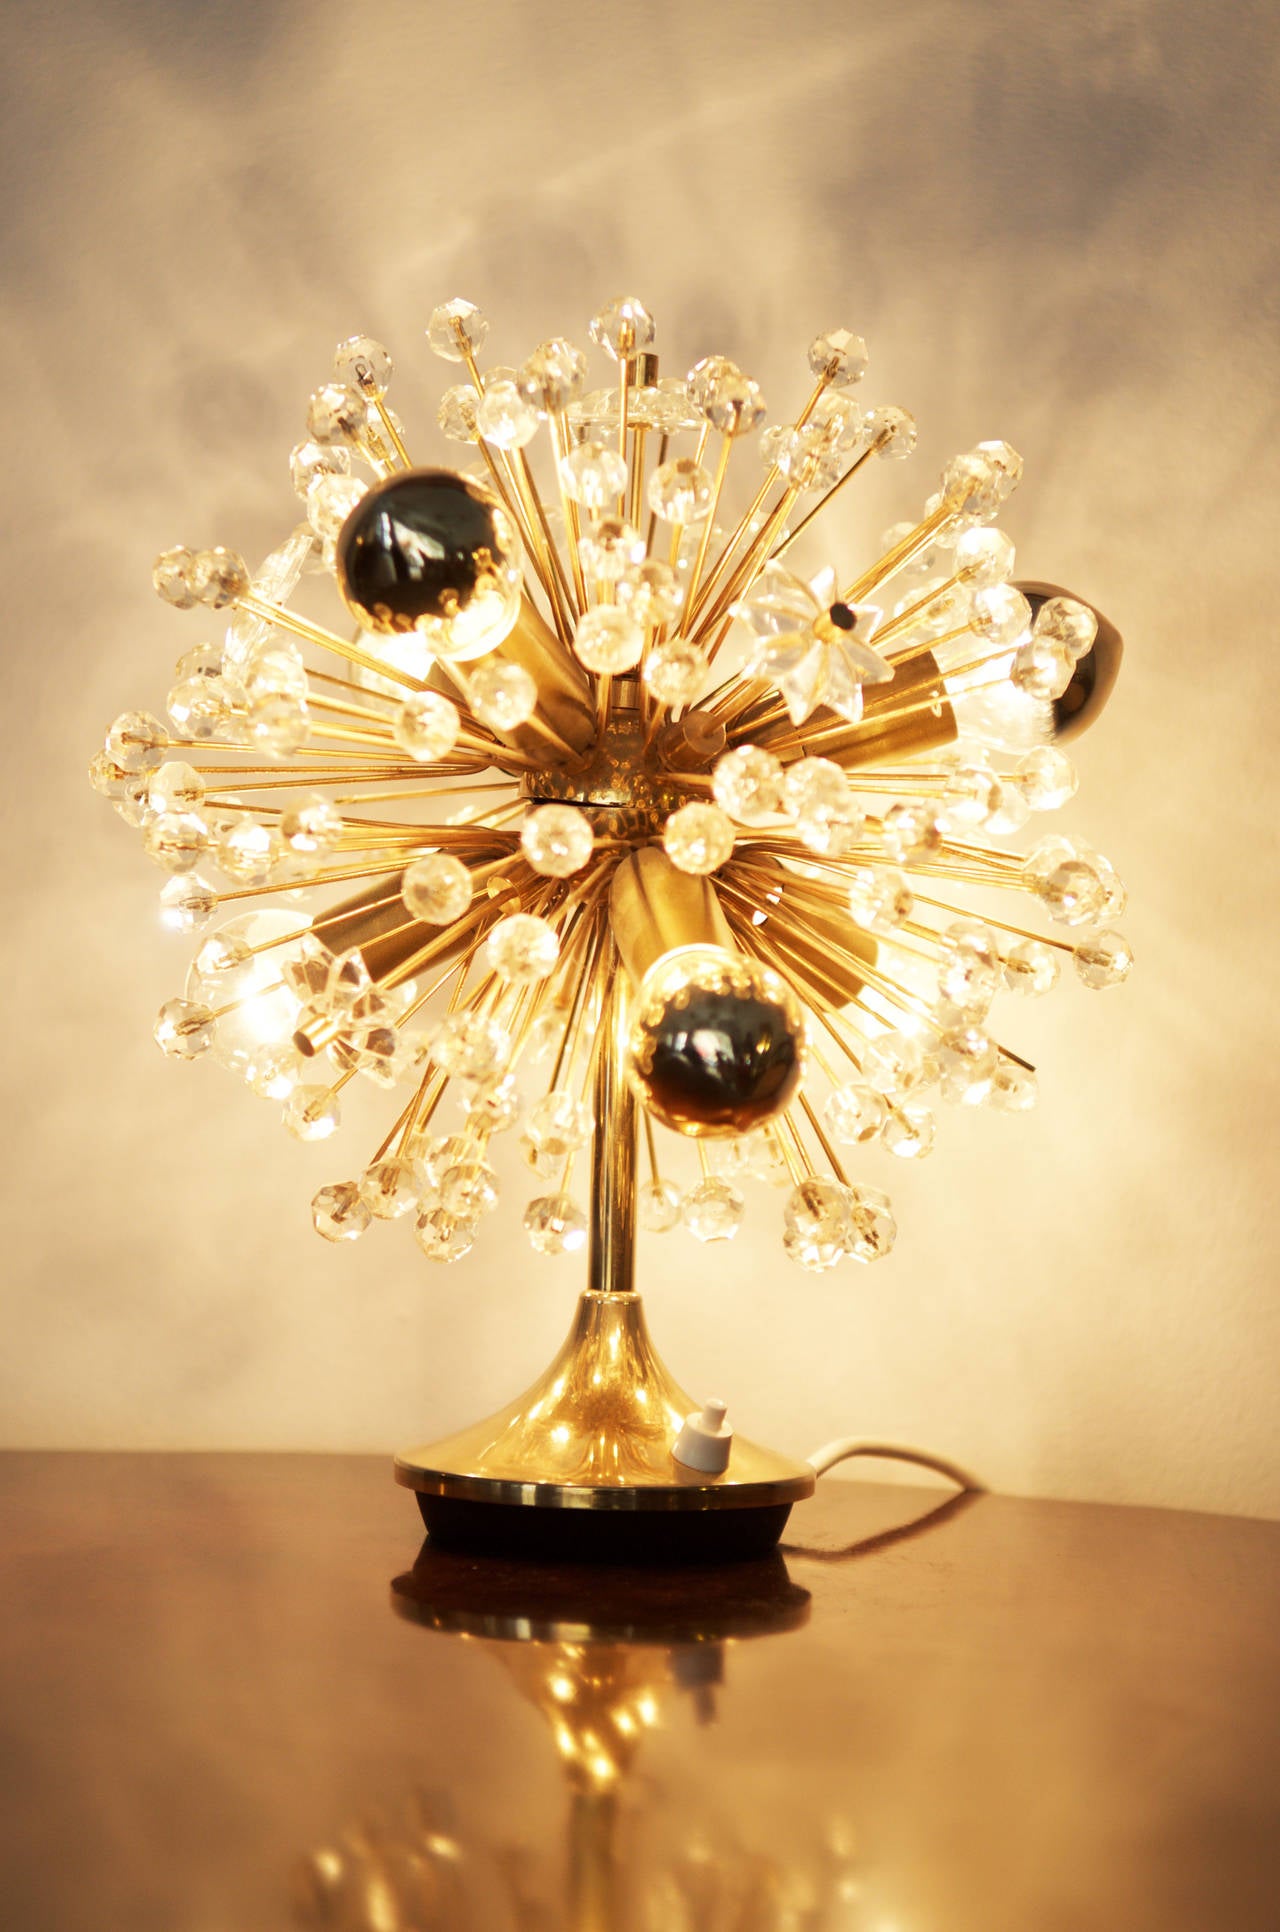 Blowball table lamp from about 1960.
Gold-plated brass, glass flowers and glass stones.